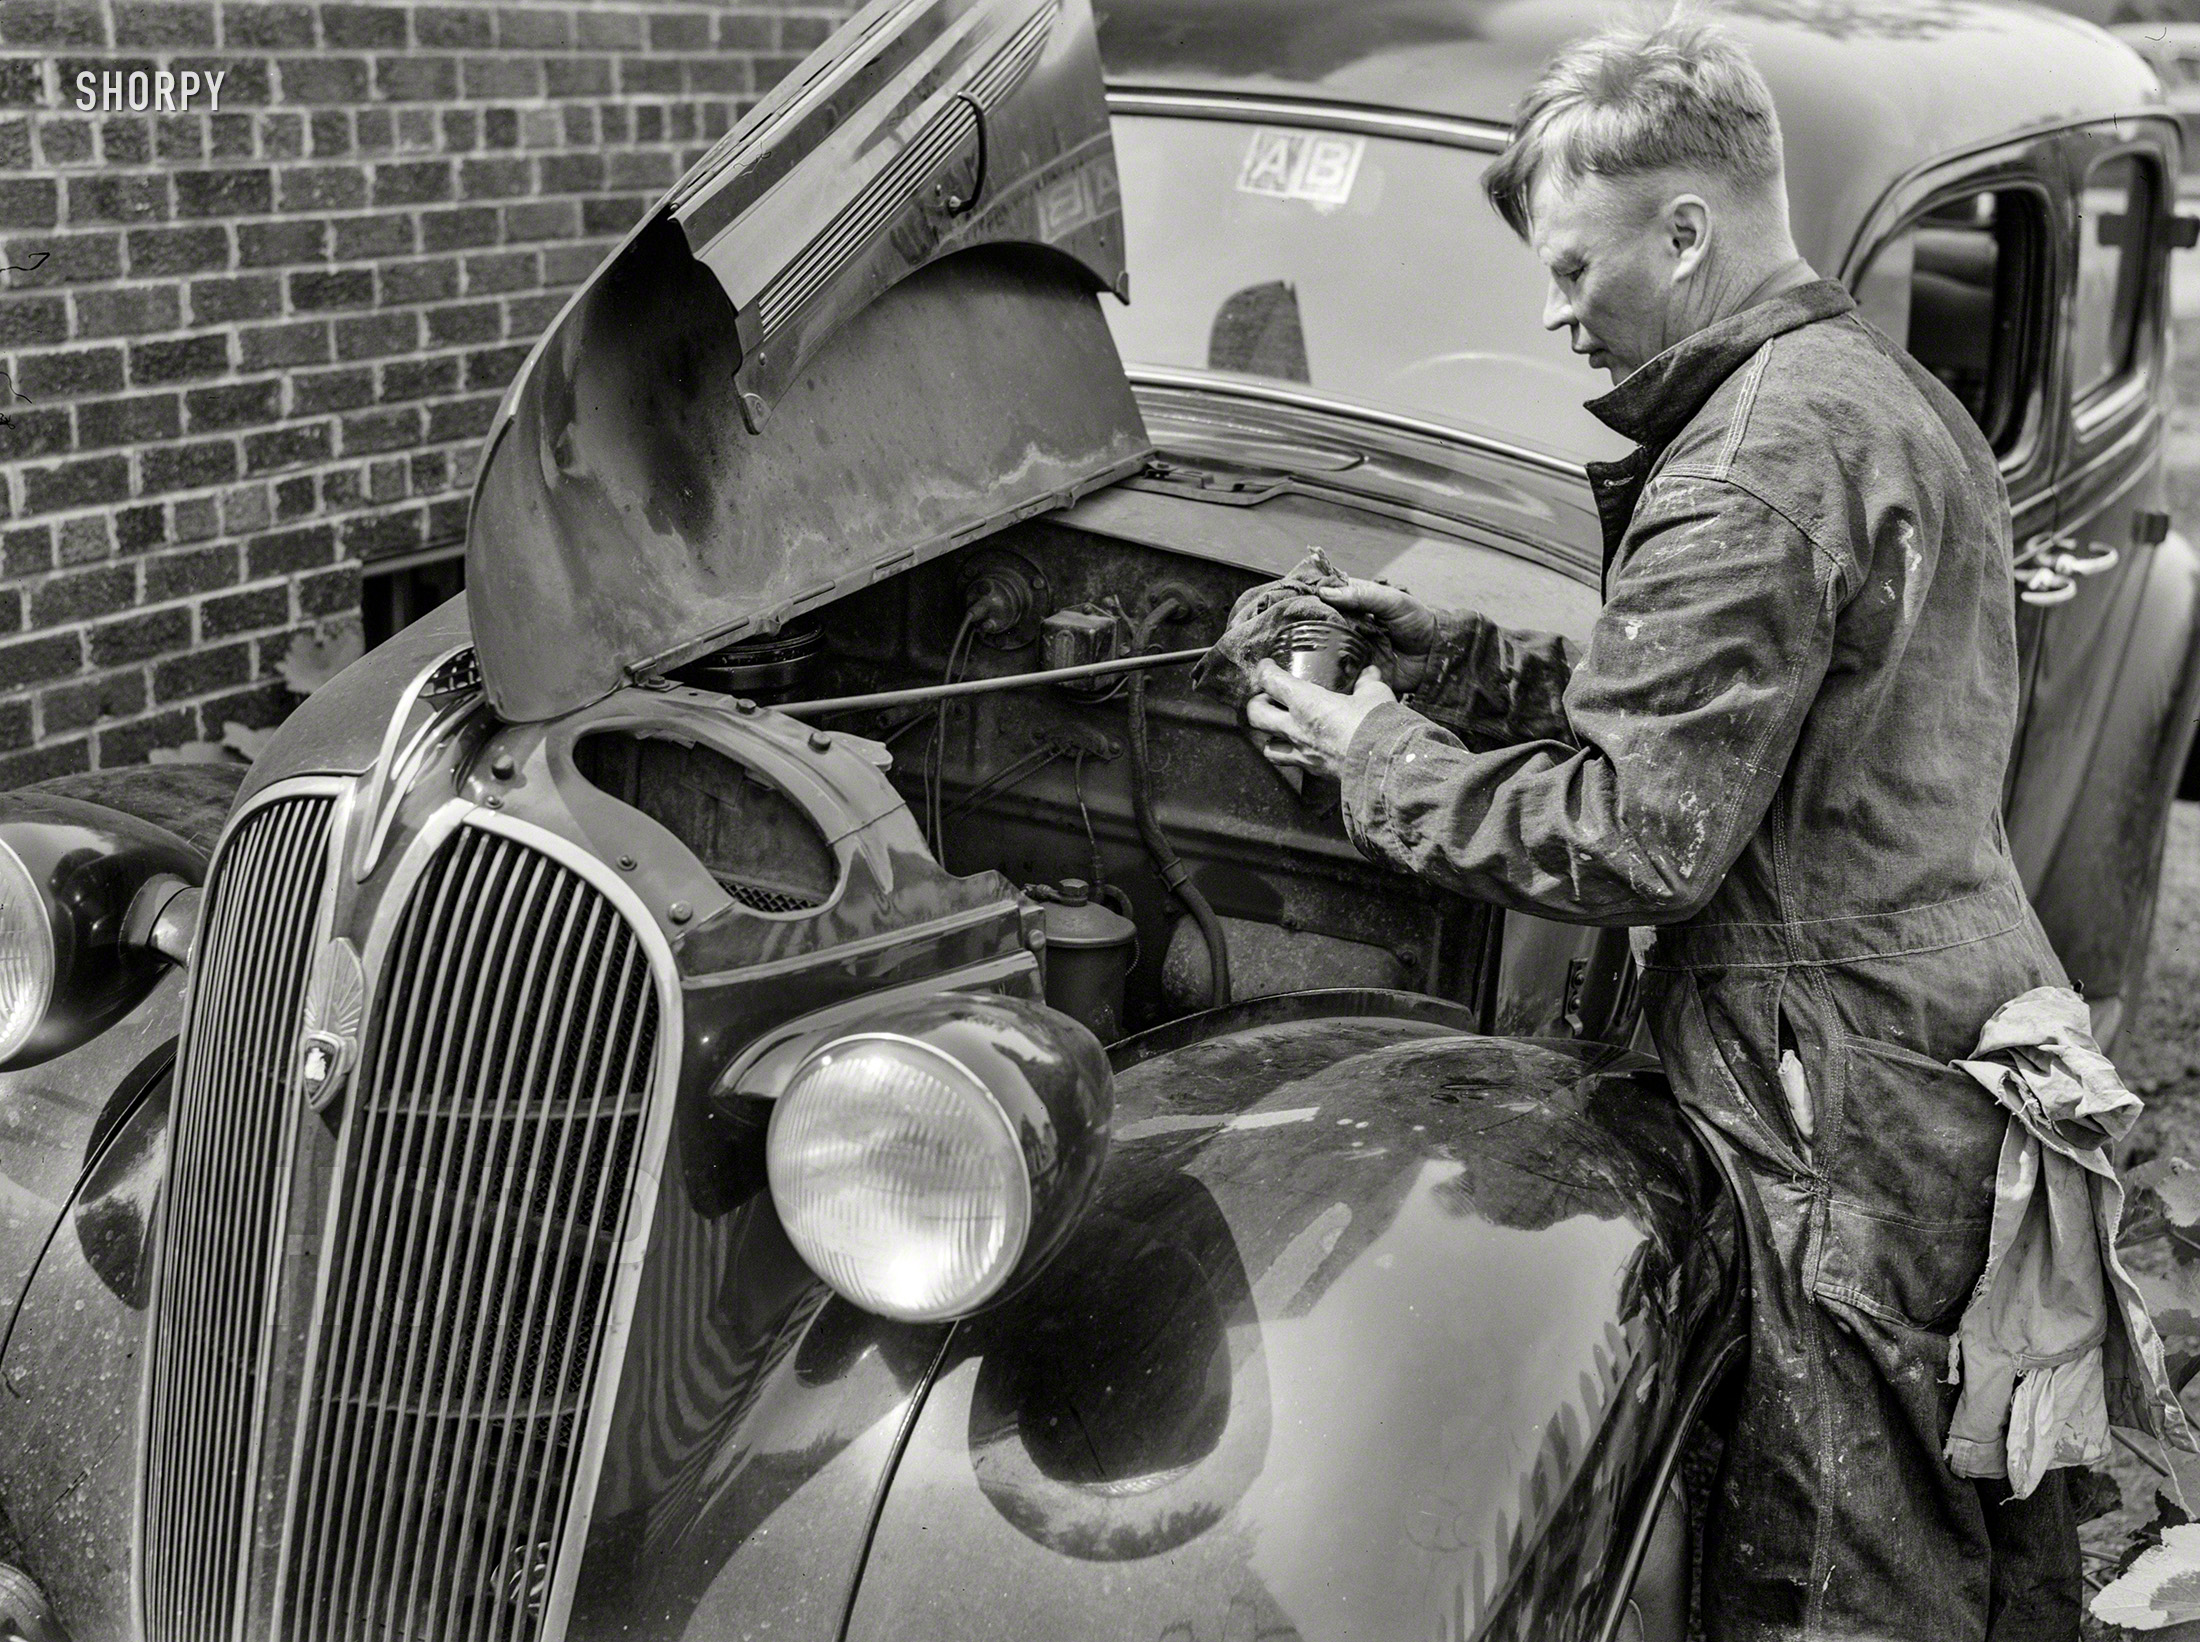 June 1943. Silver Spring, Md. "Man repairing his automobile." The Plymouth seen here. Photo by Ann Rosener, Office of War Information. View full size.